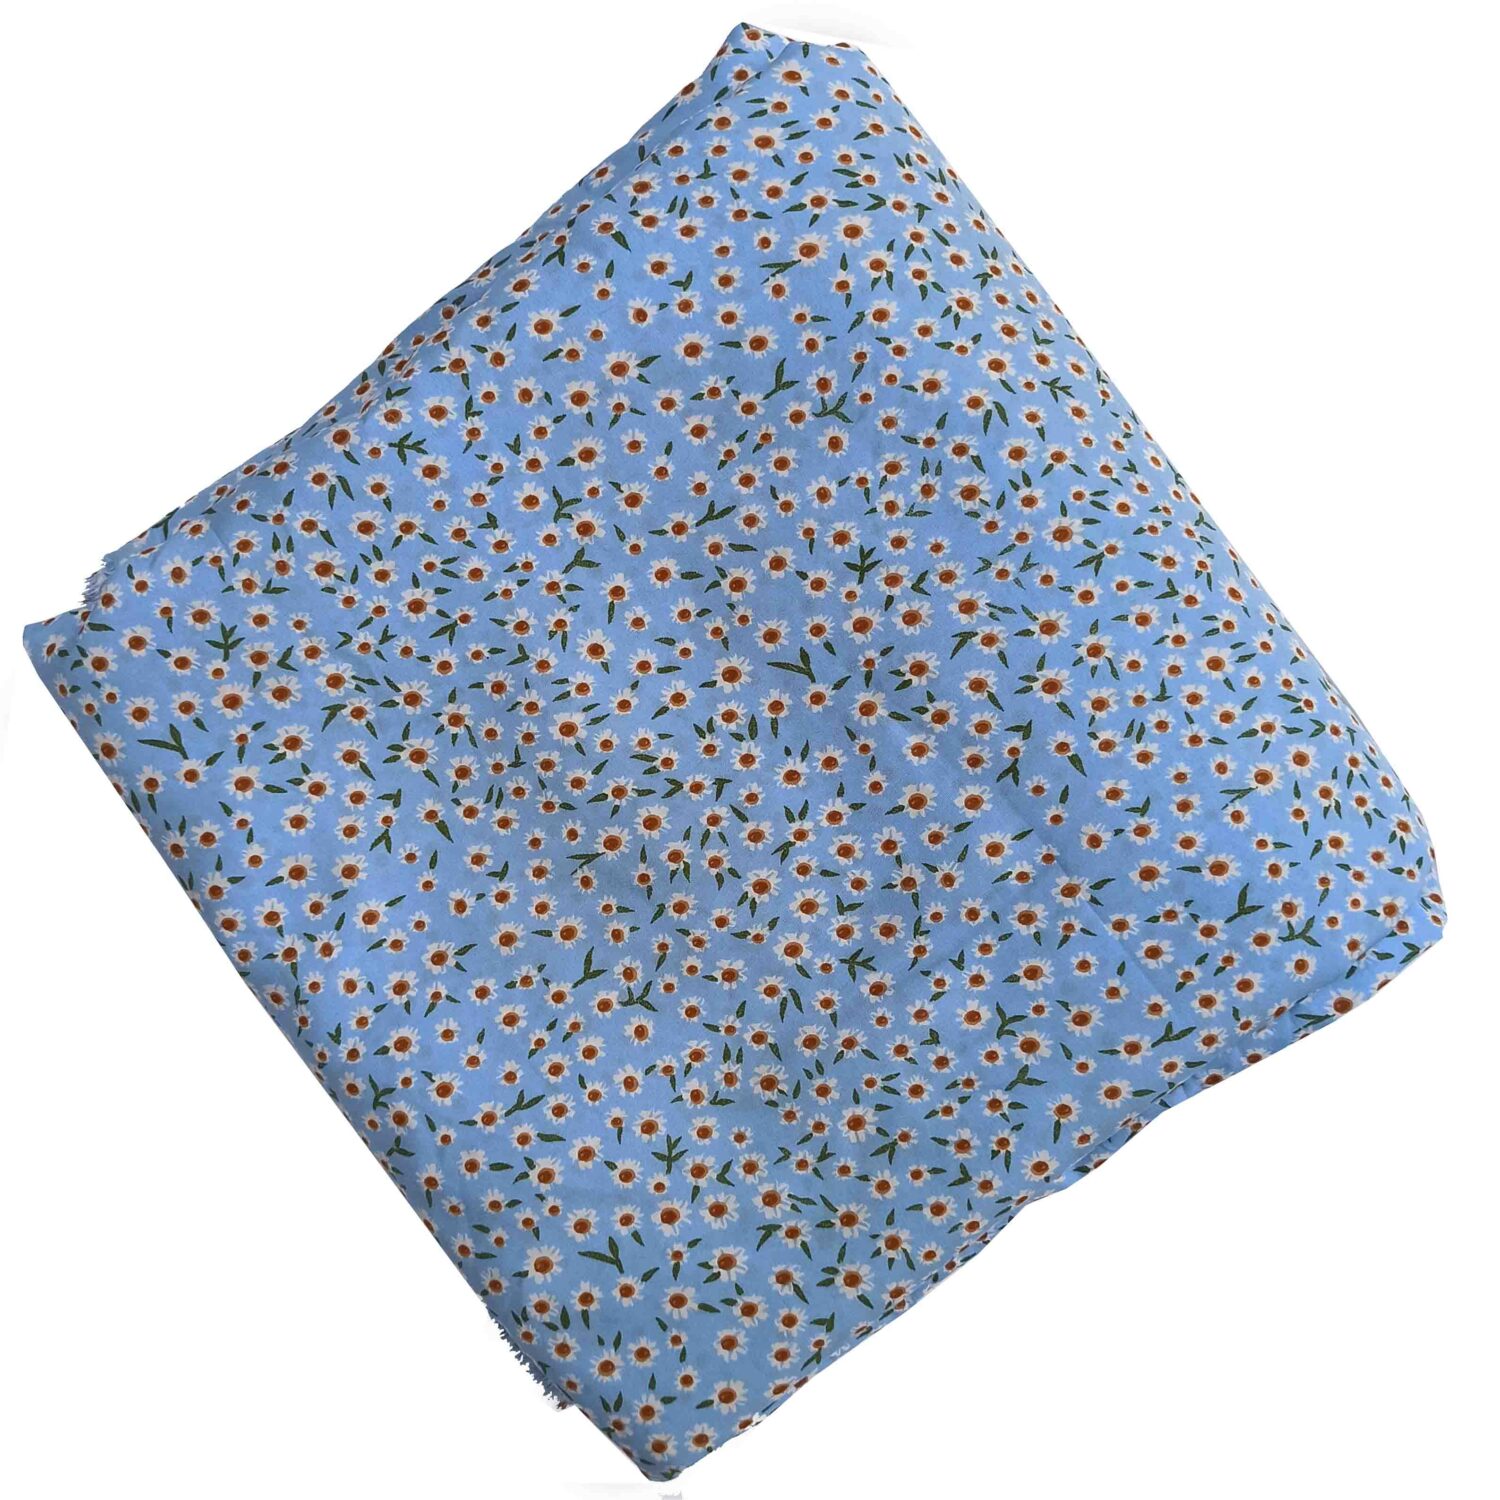 Light Blue American Crepe Fabric with Small Flower Print PAC53 1